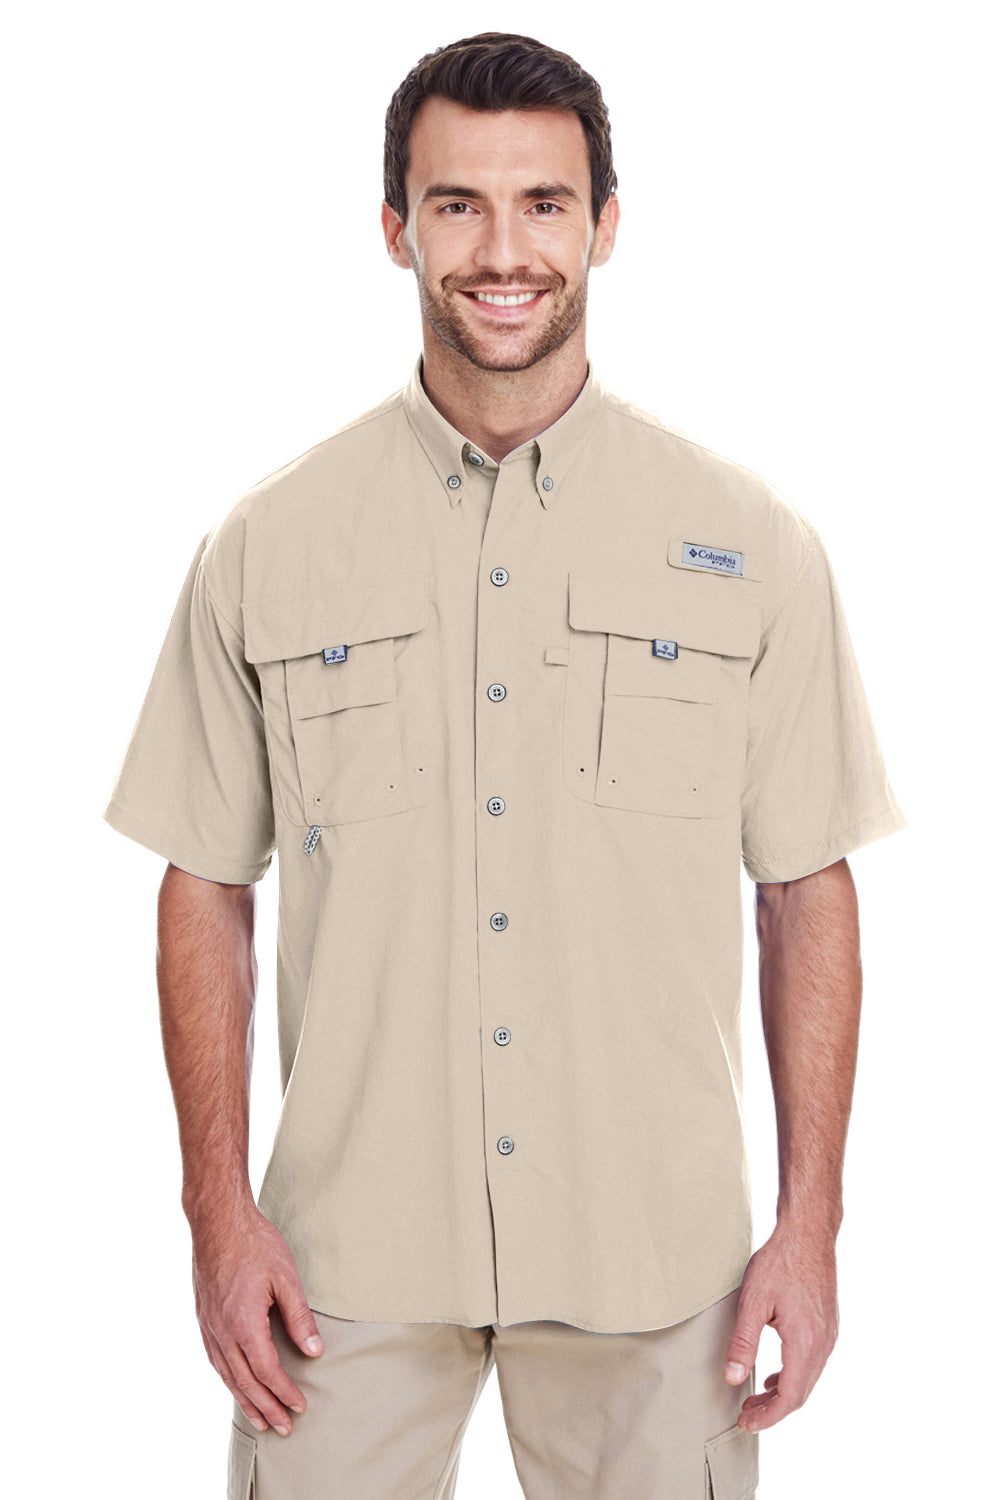 Columbia 7047 Mens Bahama II Moisture Wicking Short Sleeve Button Down Shirt w/ Double Pockets Fossil Brown Front